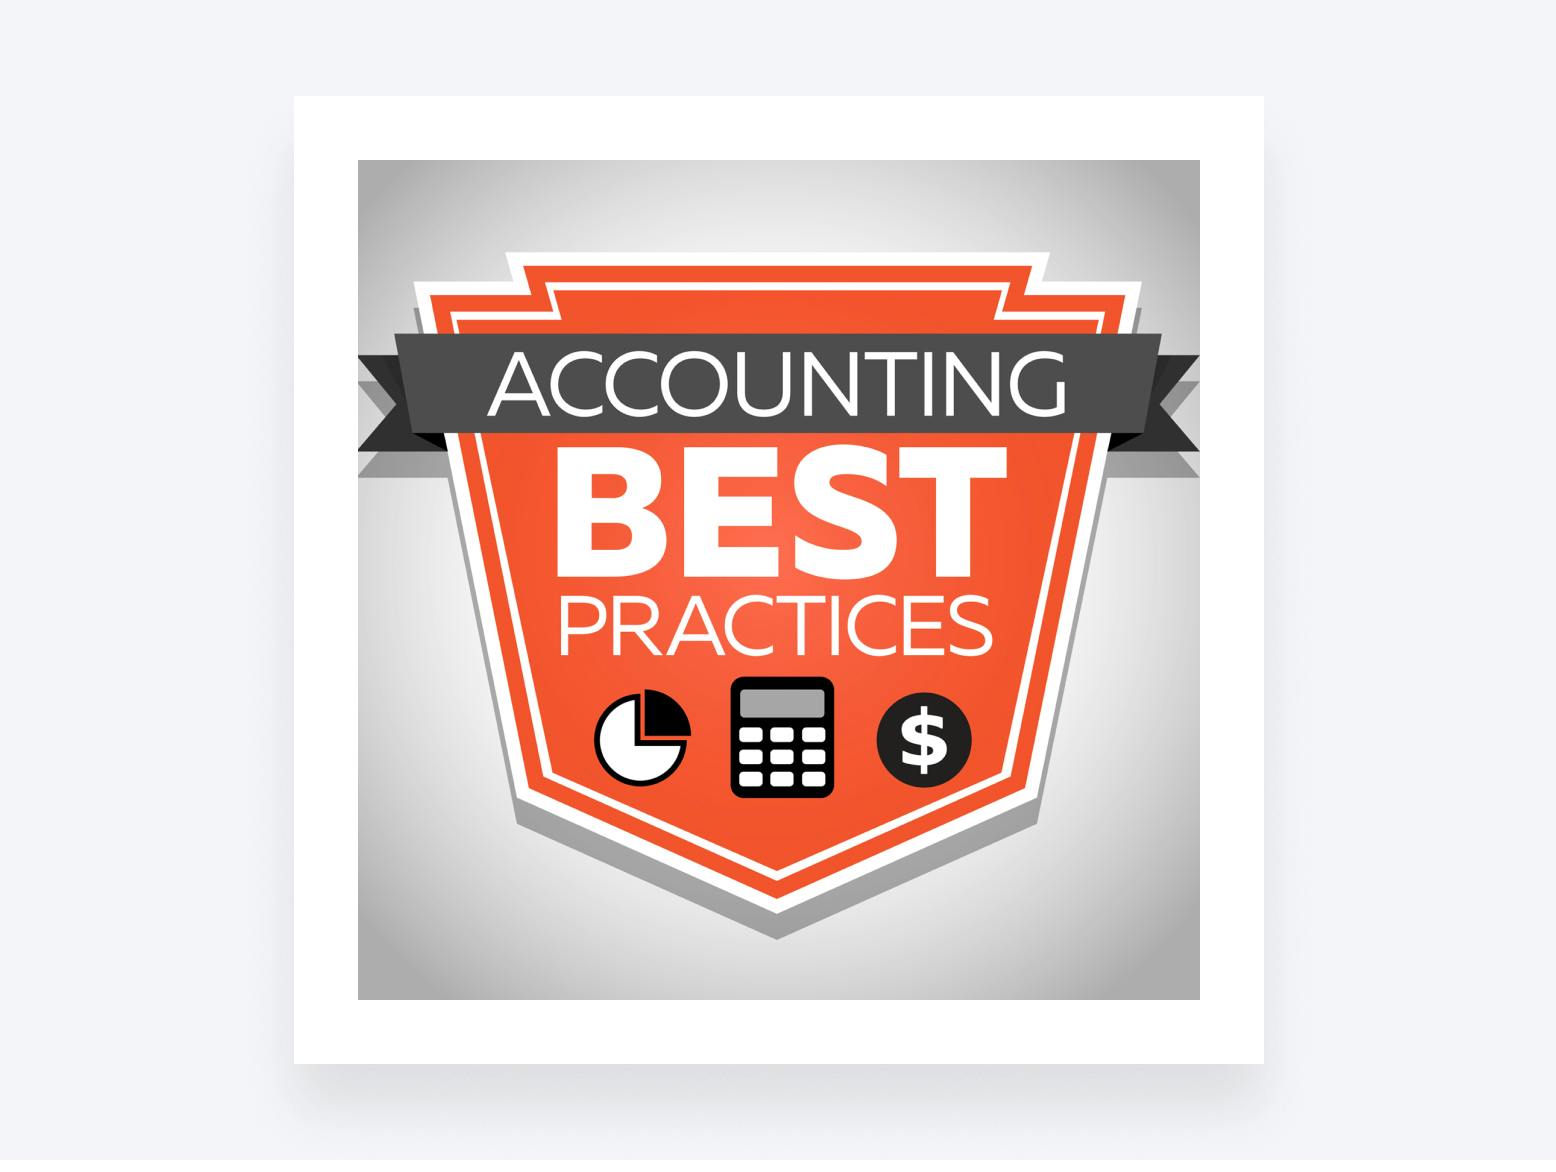 Accounting Best Practices podcast